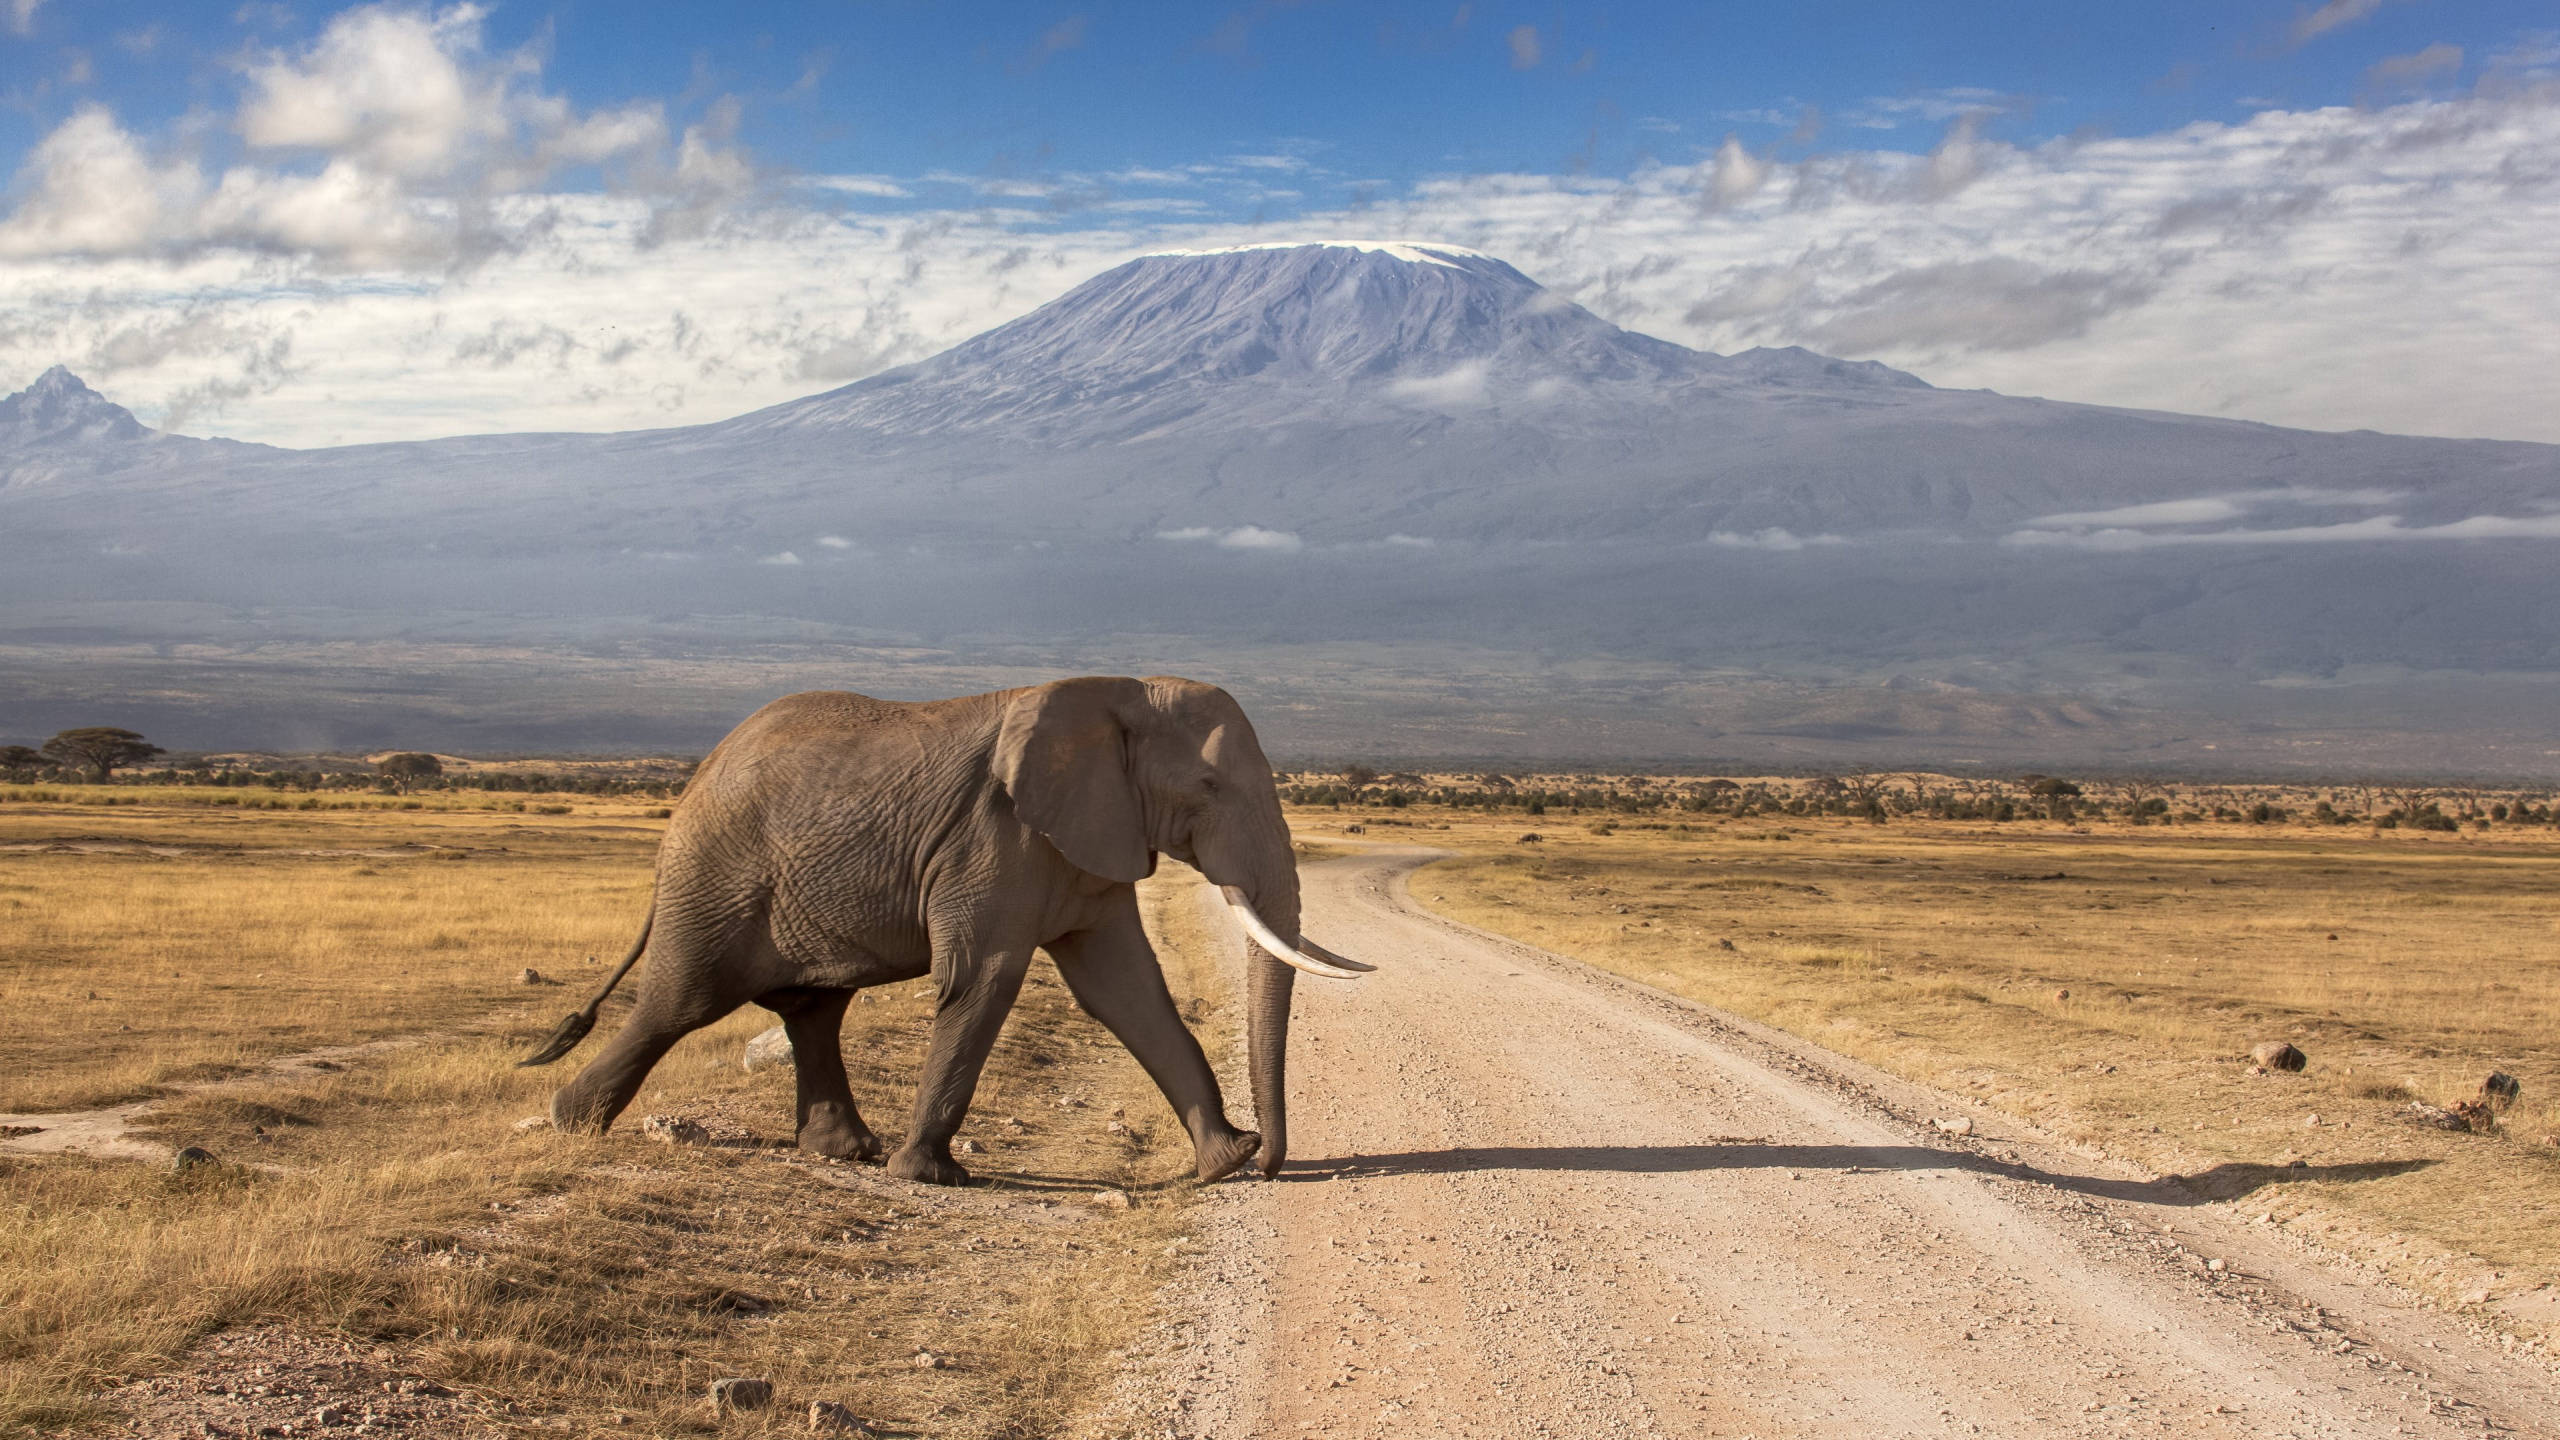 Elephant Walking on Road During Daytime. Wallpaper in 2560x1440 Resolution